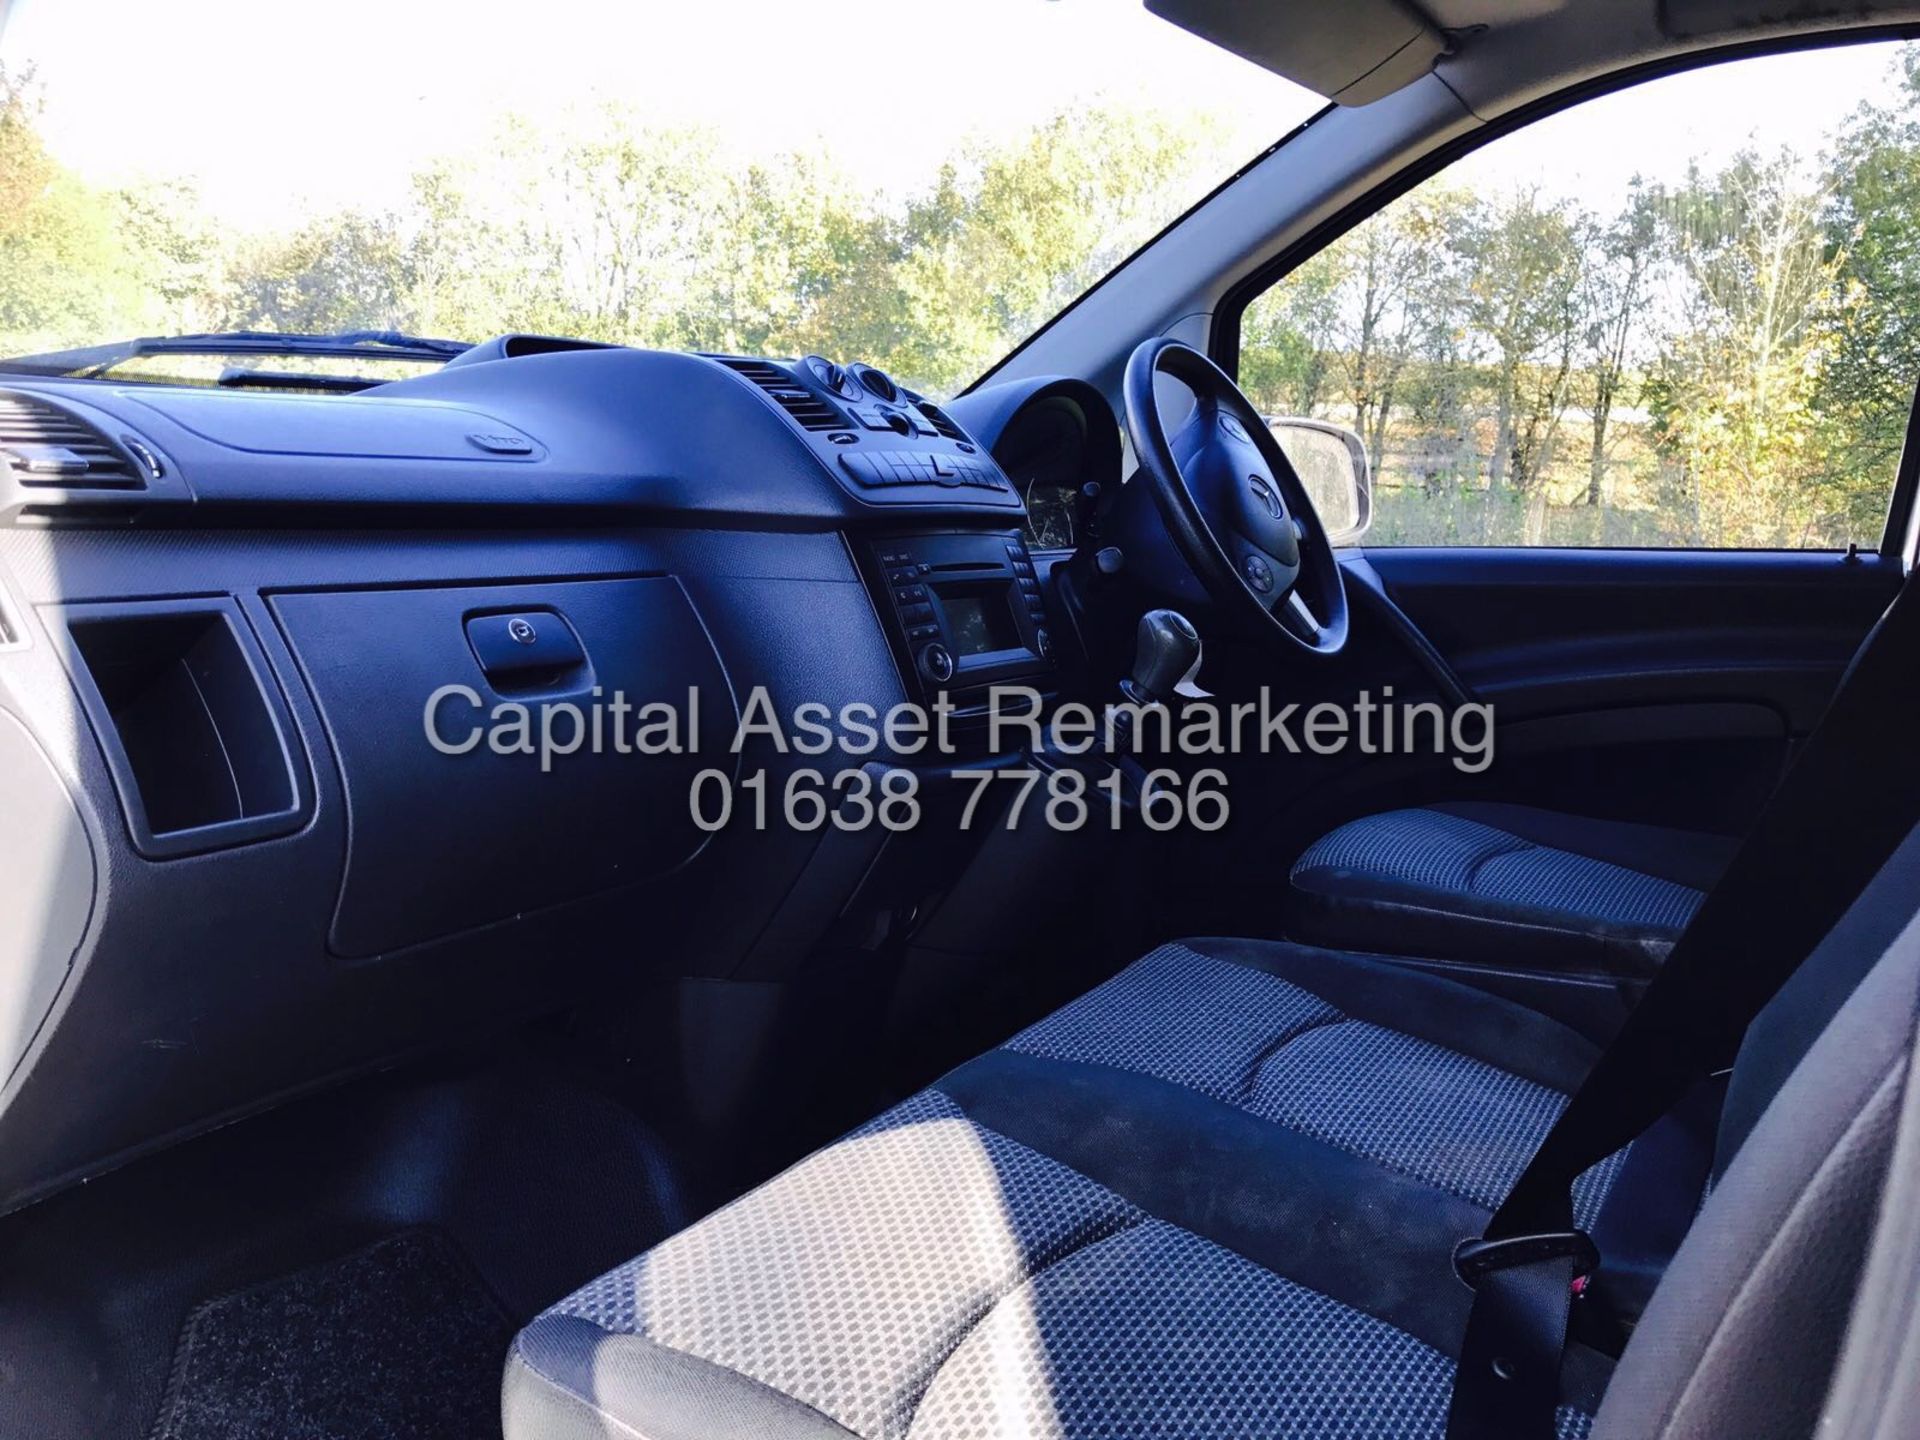 MERCEDES VITO 113CDI LWB "130BHP - 6 SPEED" 2014 MODEL - NEW SHAPE - AIR CON - LOW MILEAGE - Image 10 of 13